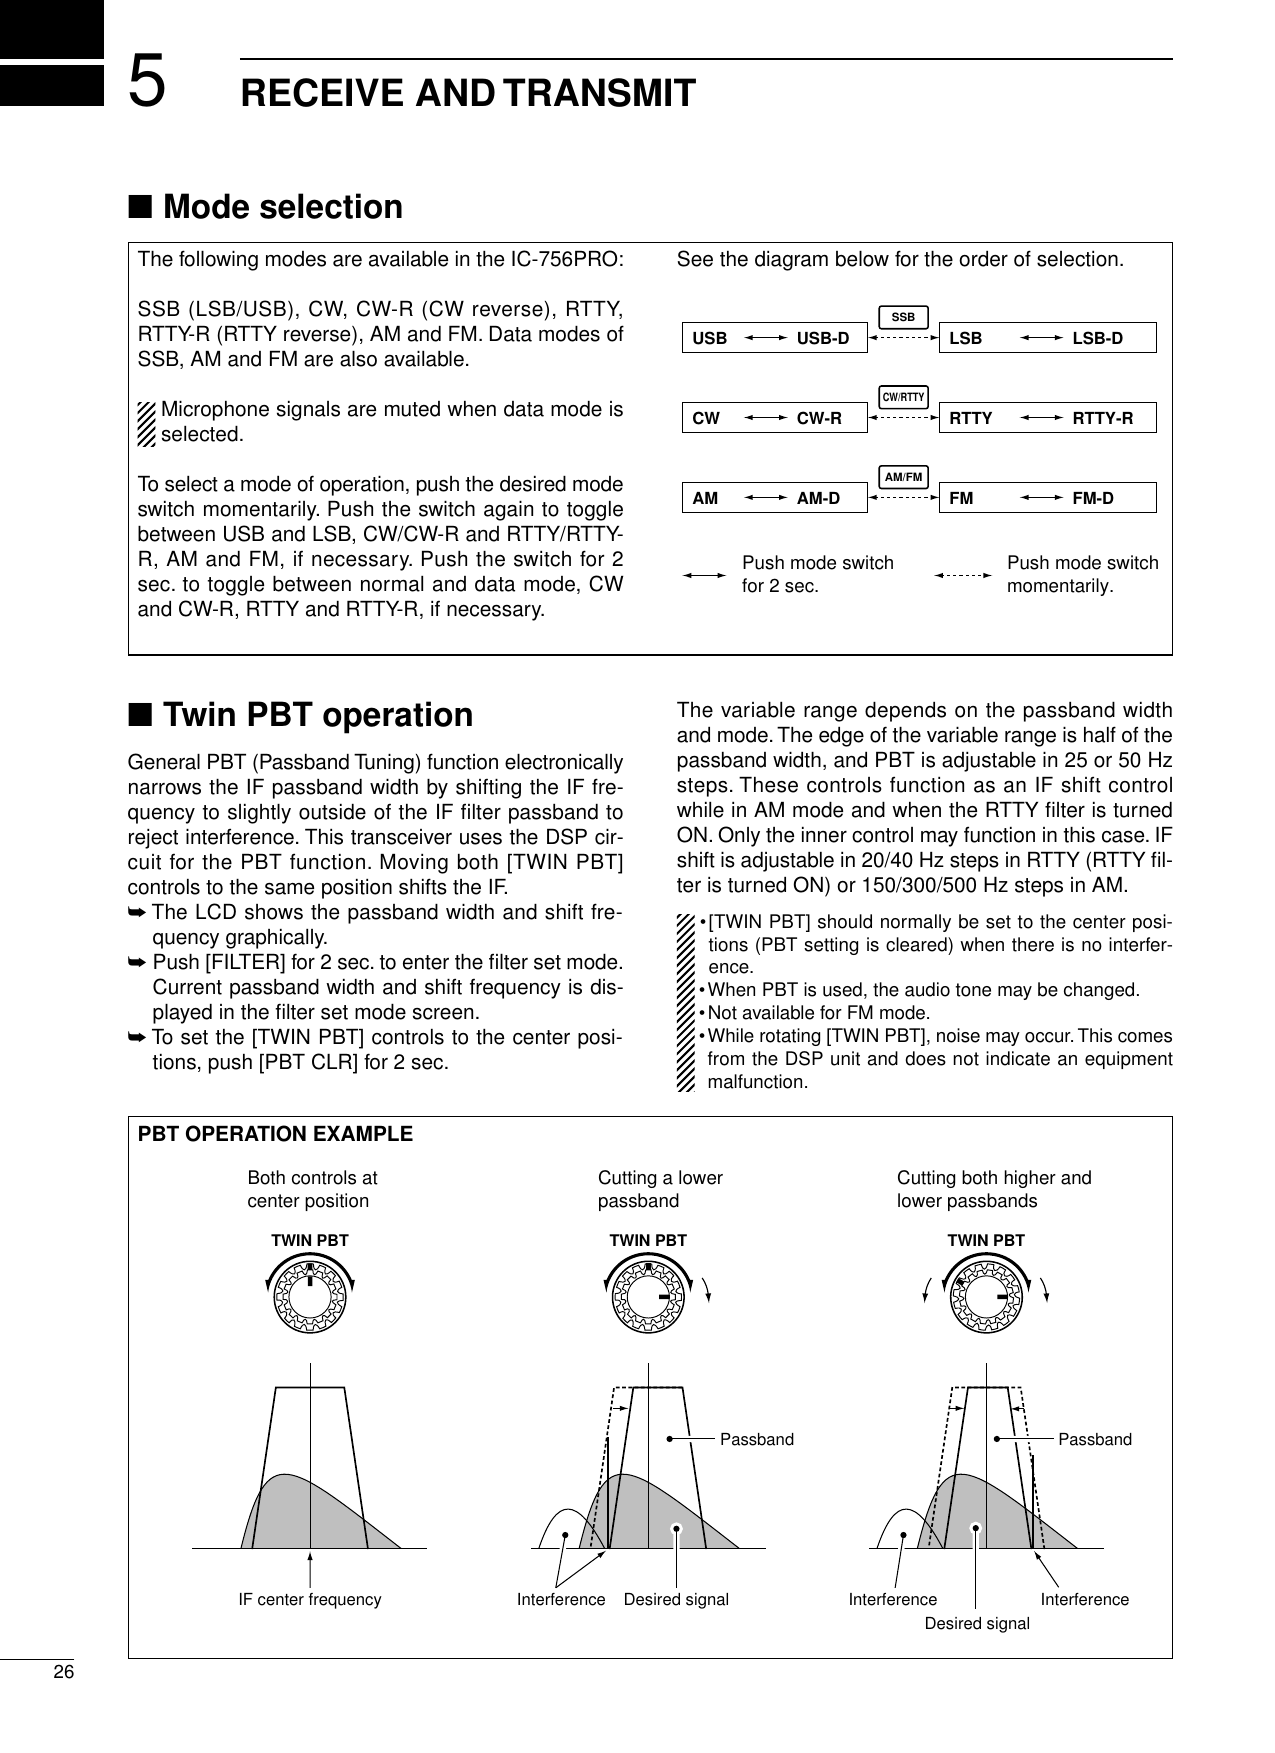 ■Mode selection■Twin PBT operationGeneral PBT (Passband Tuning) function electronicallynarrows the IF passband width by shifting the IF fre-quency to slightly outside of the IF ﬁlter passband toreject interference. This transceiver uses the DSP cir-cuit for the PBT function. Moving both [TWIN PBT]controls to the same position shifts the IF.➥The LCD shows the passband width and shift fre-quency graphically.➥Push [FILTER] for 2 sec. to enter the ﬁlter set mode.Current passband width and shift frequency is dis-played in the ﬁlter set mode screen.➥To set the [TWIN PBT] controls to the center posi-tions, push [PBT CLR] for 2 sec.The variable range depends on the passband widthand mode.The edge of the variable range is half of thepassband width, and PBT is adjustable in 25 or 50 Hzsteps. These controls function as an IF shift controlwhile in AM mode and when the RTTY ﬁlter is turnedON. Only the inner control may function in this case. IFshift is adjustable in 20/40 Hz steps in RTTY (RTTY ﬁl-ter is turned ON) or 150/300/500 Hz steps in AM.•[TWIN PBT] should normally be set to the center posi-tions (PBT setting is cleared) when there is no interfer-ence.•When PBT is used, the audio tone may be changed.•Not available for FM mode.•While rotating [TWIN PBT], noise may occur. This comesfrom the DSP unit and does not indicate an equipmentmalfunction.526RECEIVE AND TRANSMITThe following modes are available in the IC-756PRO:SSB (LSB/USB), CW, CW-R (CW reverse), RTTY,RTTY-R (RTTY reverse), AM and FM. Data modes ofSSB, AM and FM are also available.Microphone signals are muted when data mode isselected.To select a mode of operation, push the desired modeswitch momentarily. Push the switch again to togglebetween USB and LSB, CW/CW-R and RTTY/RTTY-R, AM and FM, if necessary. Push the switch for 2sec. to toggle between normal and data mode, CWand CW-R, RTTY and RTTY-R, if necessary.See the diagram below for the order of selection.PBT OPERATION EXAMPLESSBCW/RTTYAM/FMUSB USB-DCW CW-RAM AM-DPush mode switch for 2 sec. Push mode switchmomentarily.LSB LSB-DRTTY RTTY-RFM FM-DTWIN PBT TWIN PBTTWIN PBTIF center frequency Interference Desired signalPassbandBoth controls at center position Cutting a lower passband Cutting both higher and lower passbandsInterference InterferenceDesired signalPassband